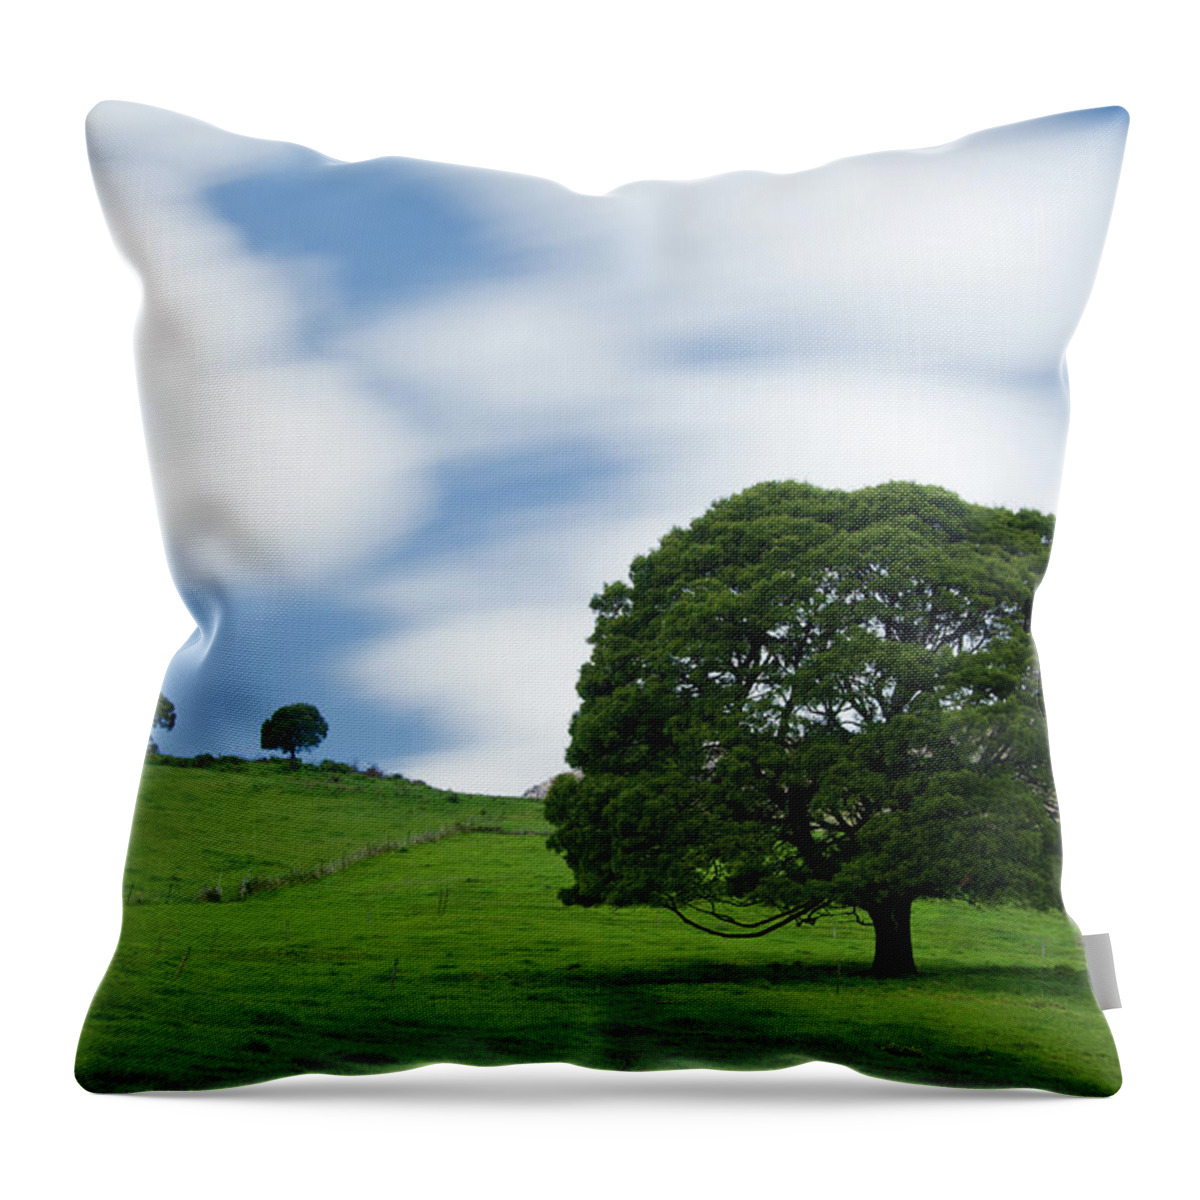 Tranquility Throw Pillow featuring the photograph The Big Tree by Thienthongthai Worachat